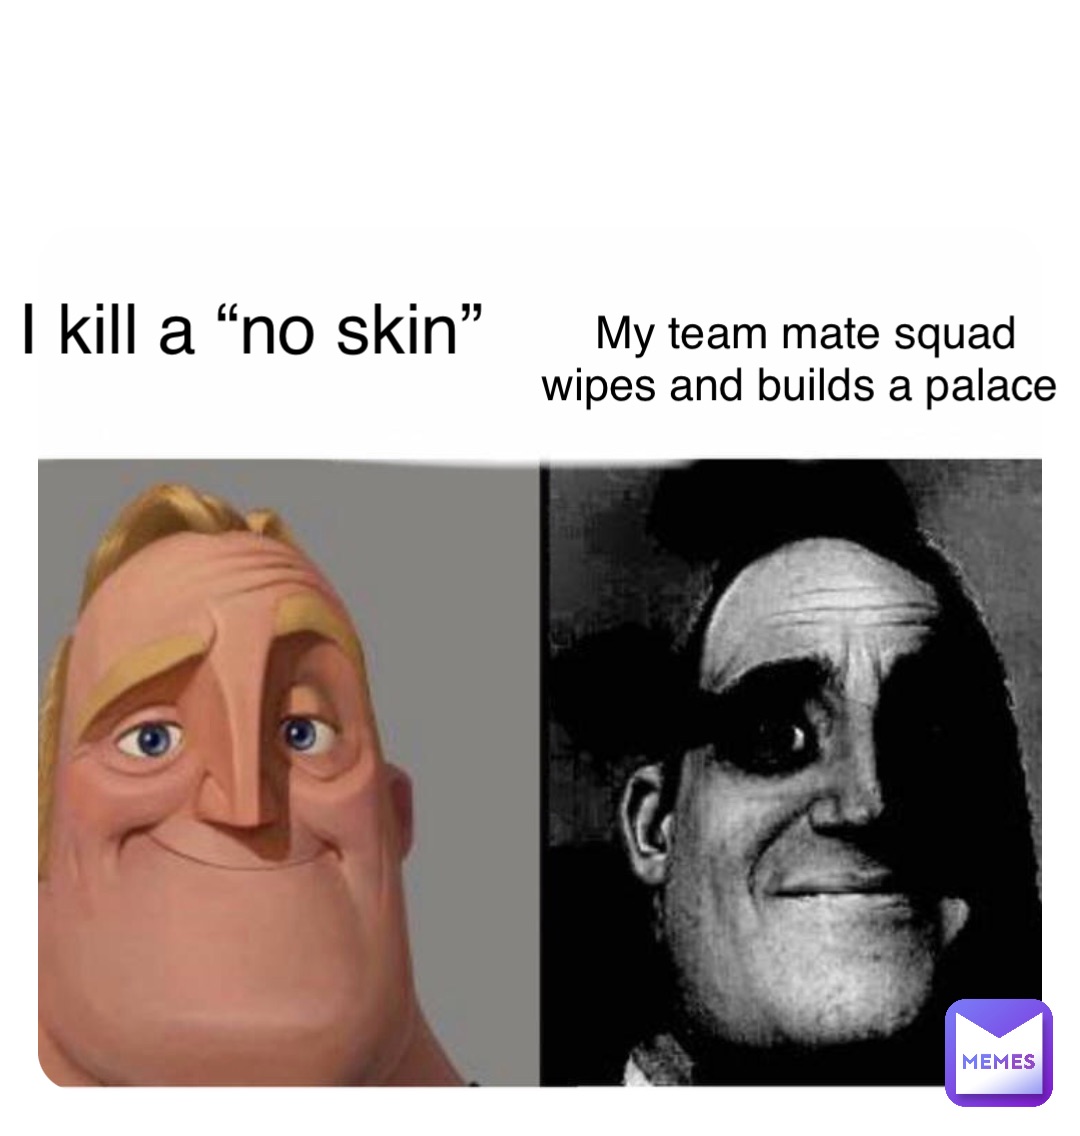 Double tap to edit I kill a “no skin” My team mate squad wipes and builds a palace